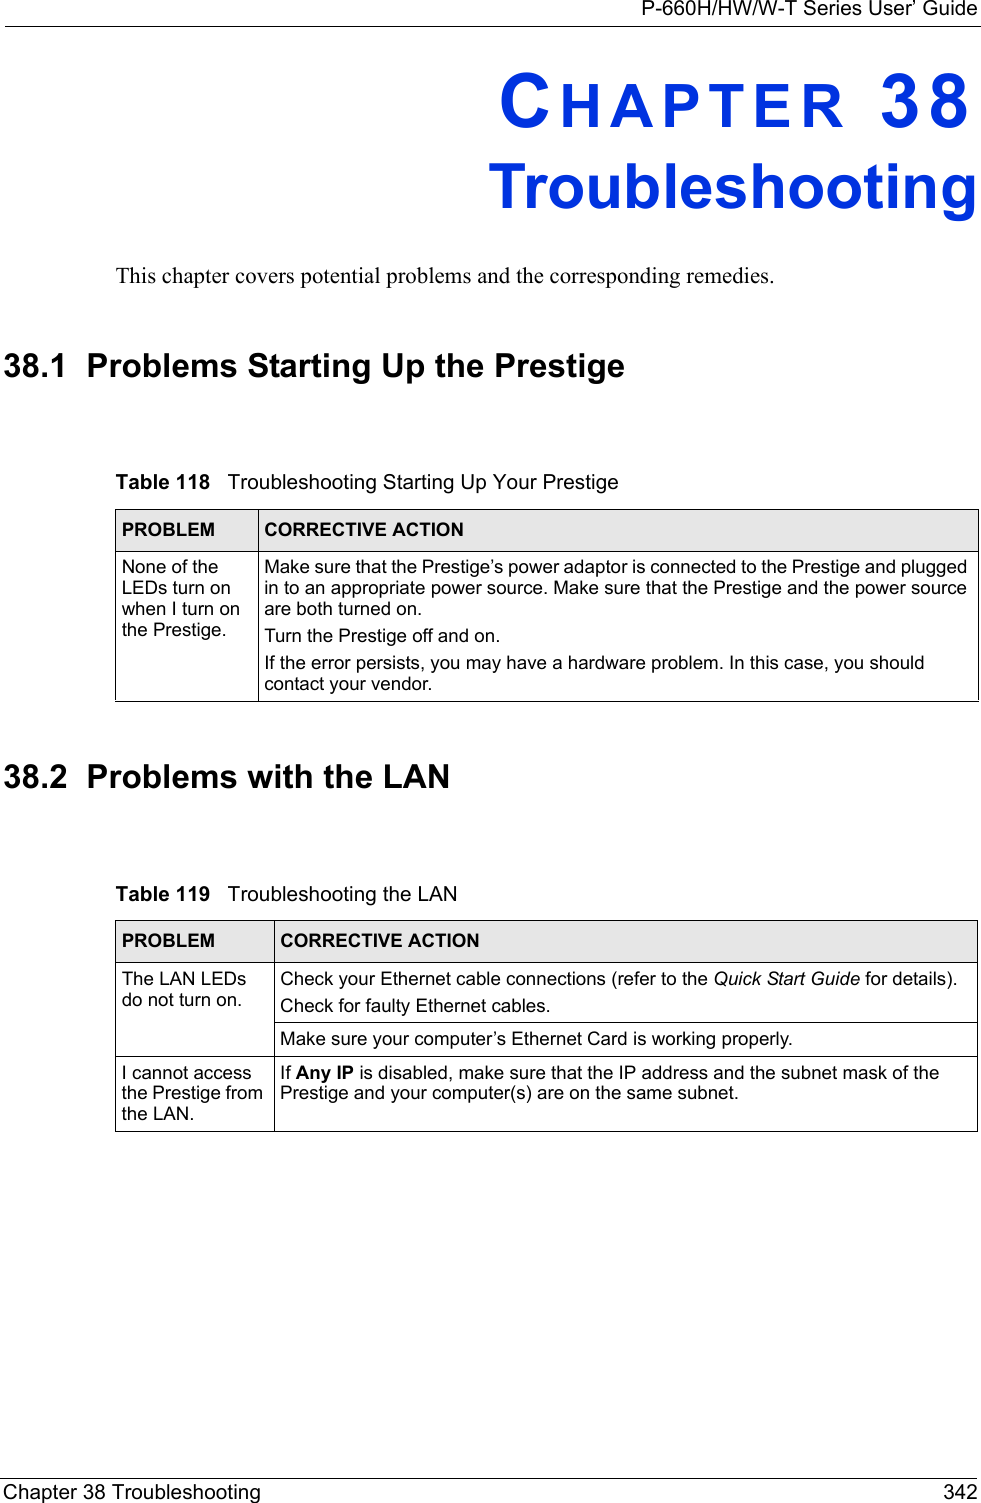 P-660H/HW/W-T Series User’ GuideChapter 38 Troubleshooting 342CHAPTER 38TroubleshootingThis chapter covers potential problems and the corresponding remedies.38.1  Problems Starting Up the Prestige38.2  Problems with the LANTable 118   Troubleshooting Starting Up Your PrestigePROBLEM CORRECTIVE ACTIONNone of the LEDs turn on when I turn on the Prestige.Make sure that the Prestige’s power adaptor is connected to the Prestige and plugged in to an appropriate power source. Make sure that the Prestige and the power source are both turned on.Turn the Prestige off and on.If the error persists, you may have a hardware problem. In this case, you should contact your vendor.Table 119   Troubleshooting the LANPROBLEM CORRECTIVE ACTIONThe LAN LEDs do not turn on.Check your Ethernet cable connections (refer to the Quick Start Guide for details). Check for faulty Ethernet cables.Make sure your computer’s Ethernet Card is working properly.I cannot access the Prestige from the LAN. If Any IP is disabled, make sure that the IP address and the subnet mask of the Prestige and your computer(s) are on the same subnet.